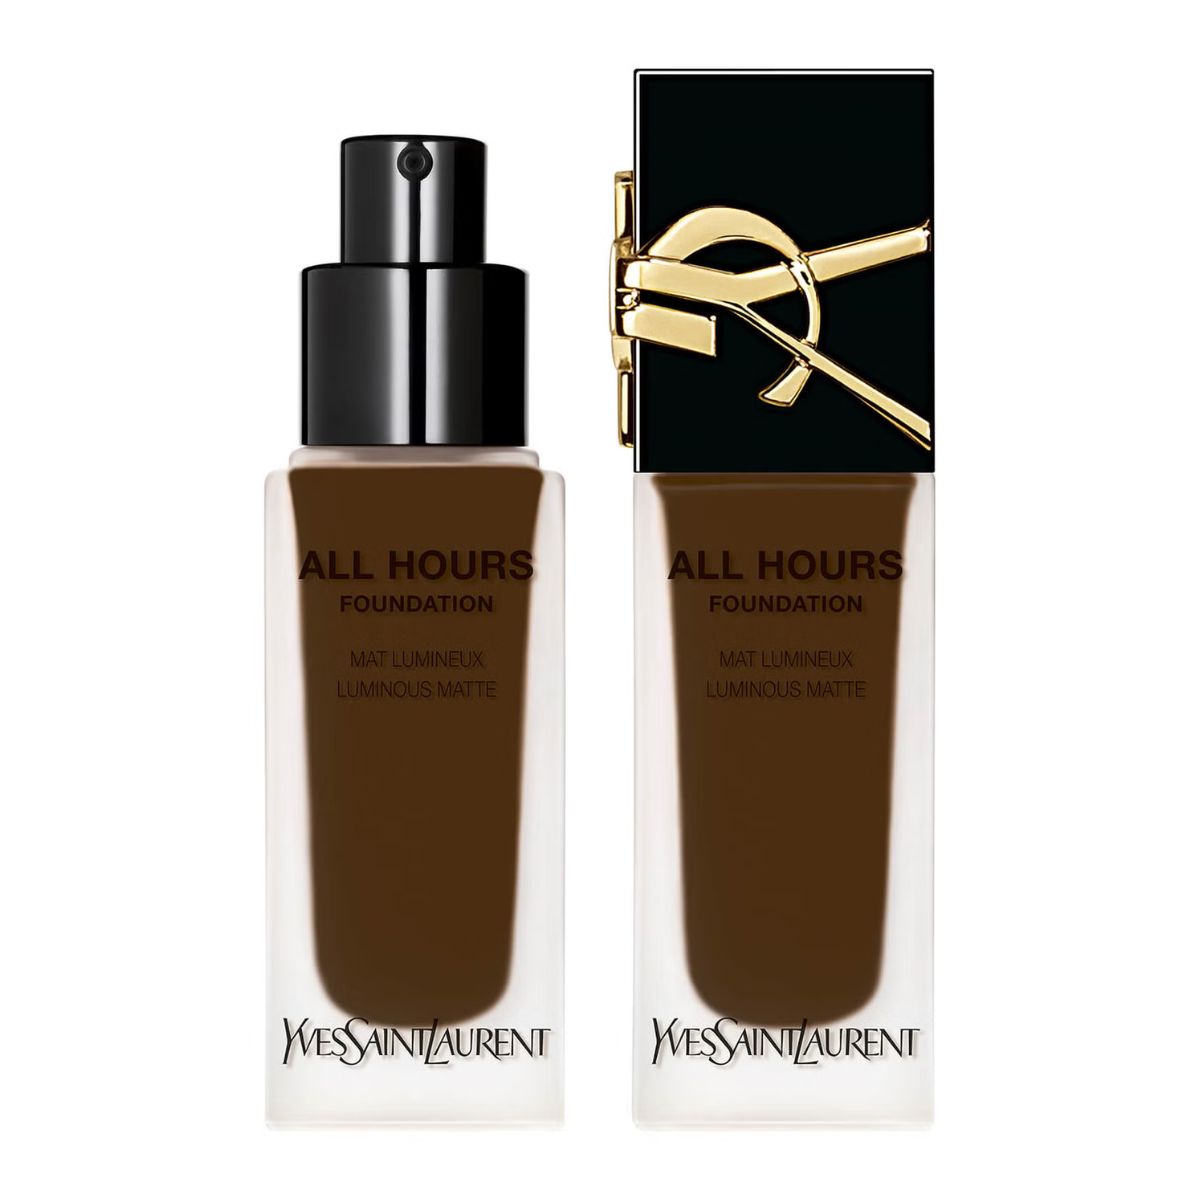 Yves Saint Laurent All Hours Luminous Matte Foundation with SPF 39